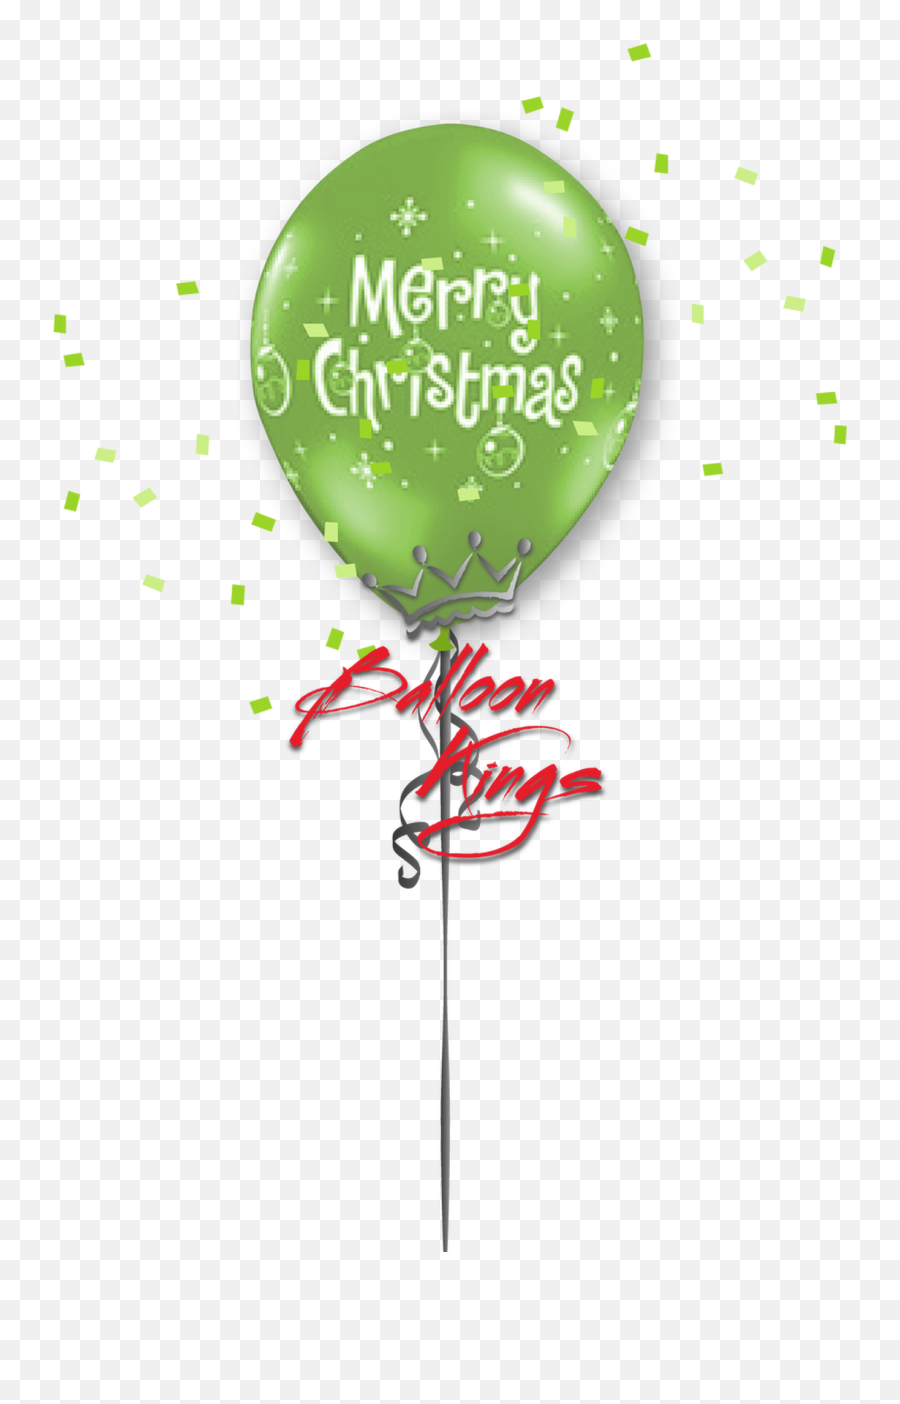 11in Latex Merry Christmas Ornaments - Lime Green Merry Christmas Balloon Clipart Emoji,Emoji Christmas Ornaments